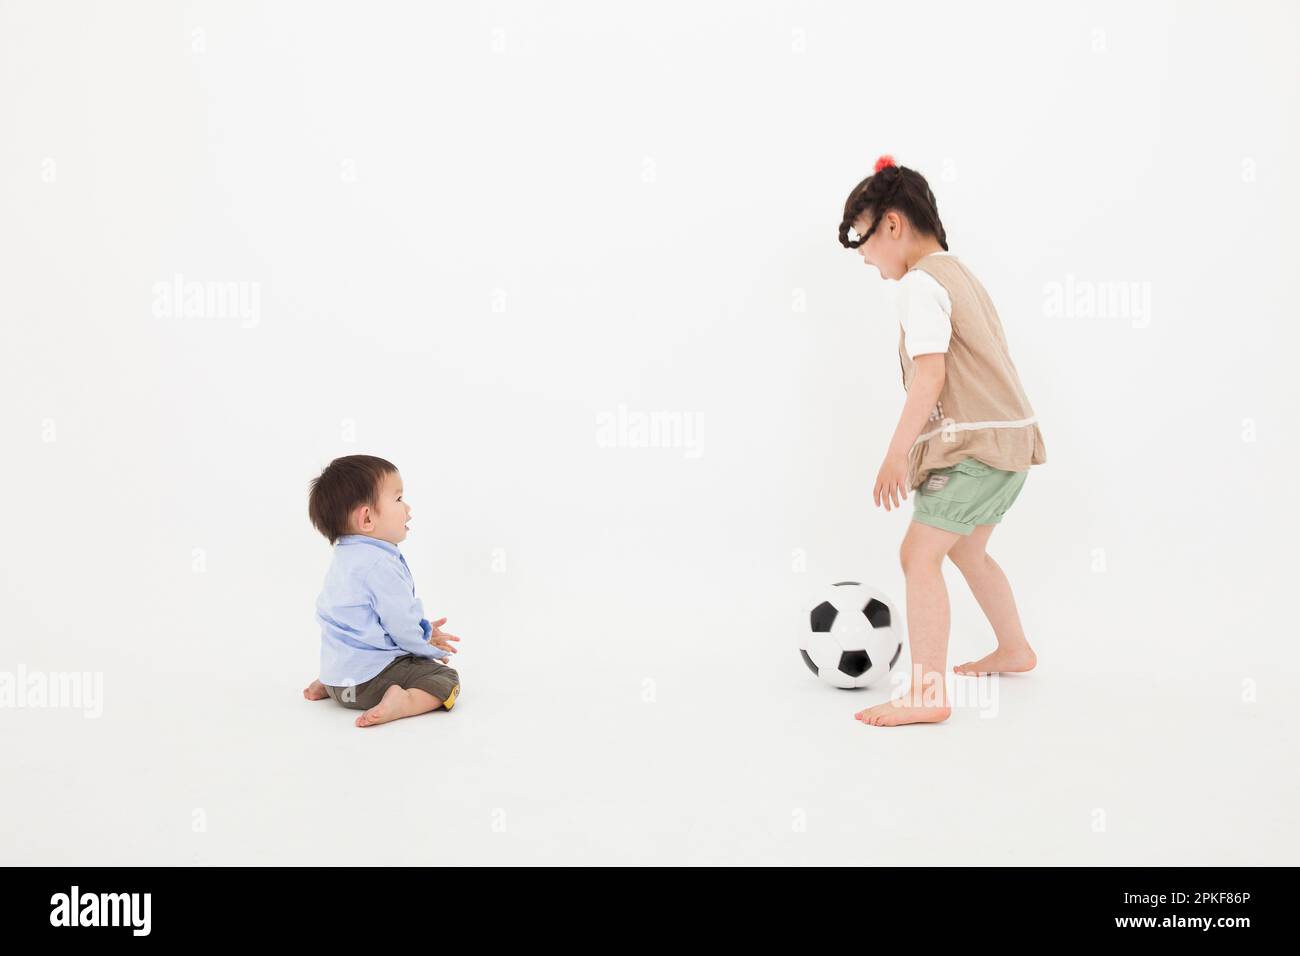 Boy and girl playing with soccer ball Stock Photo